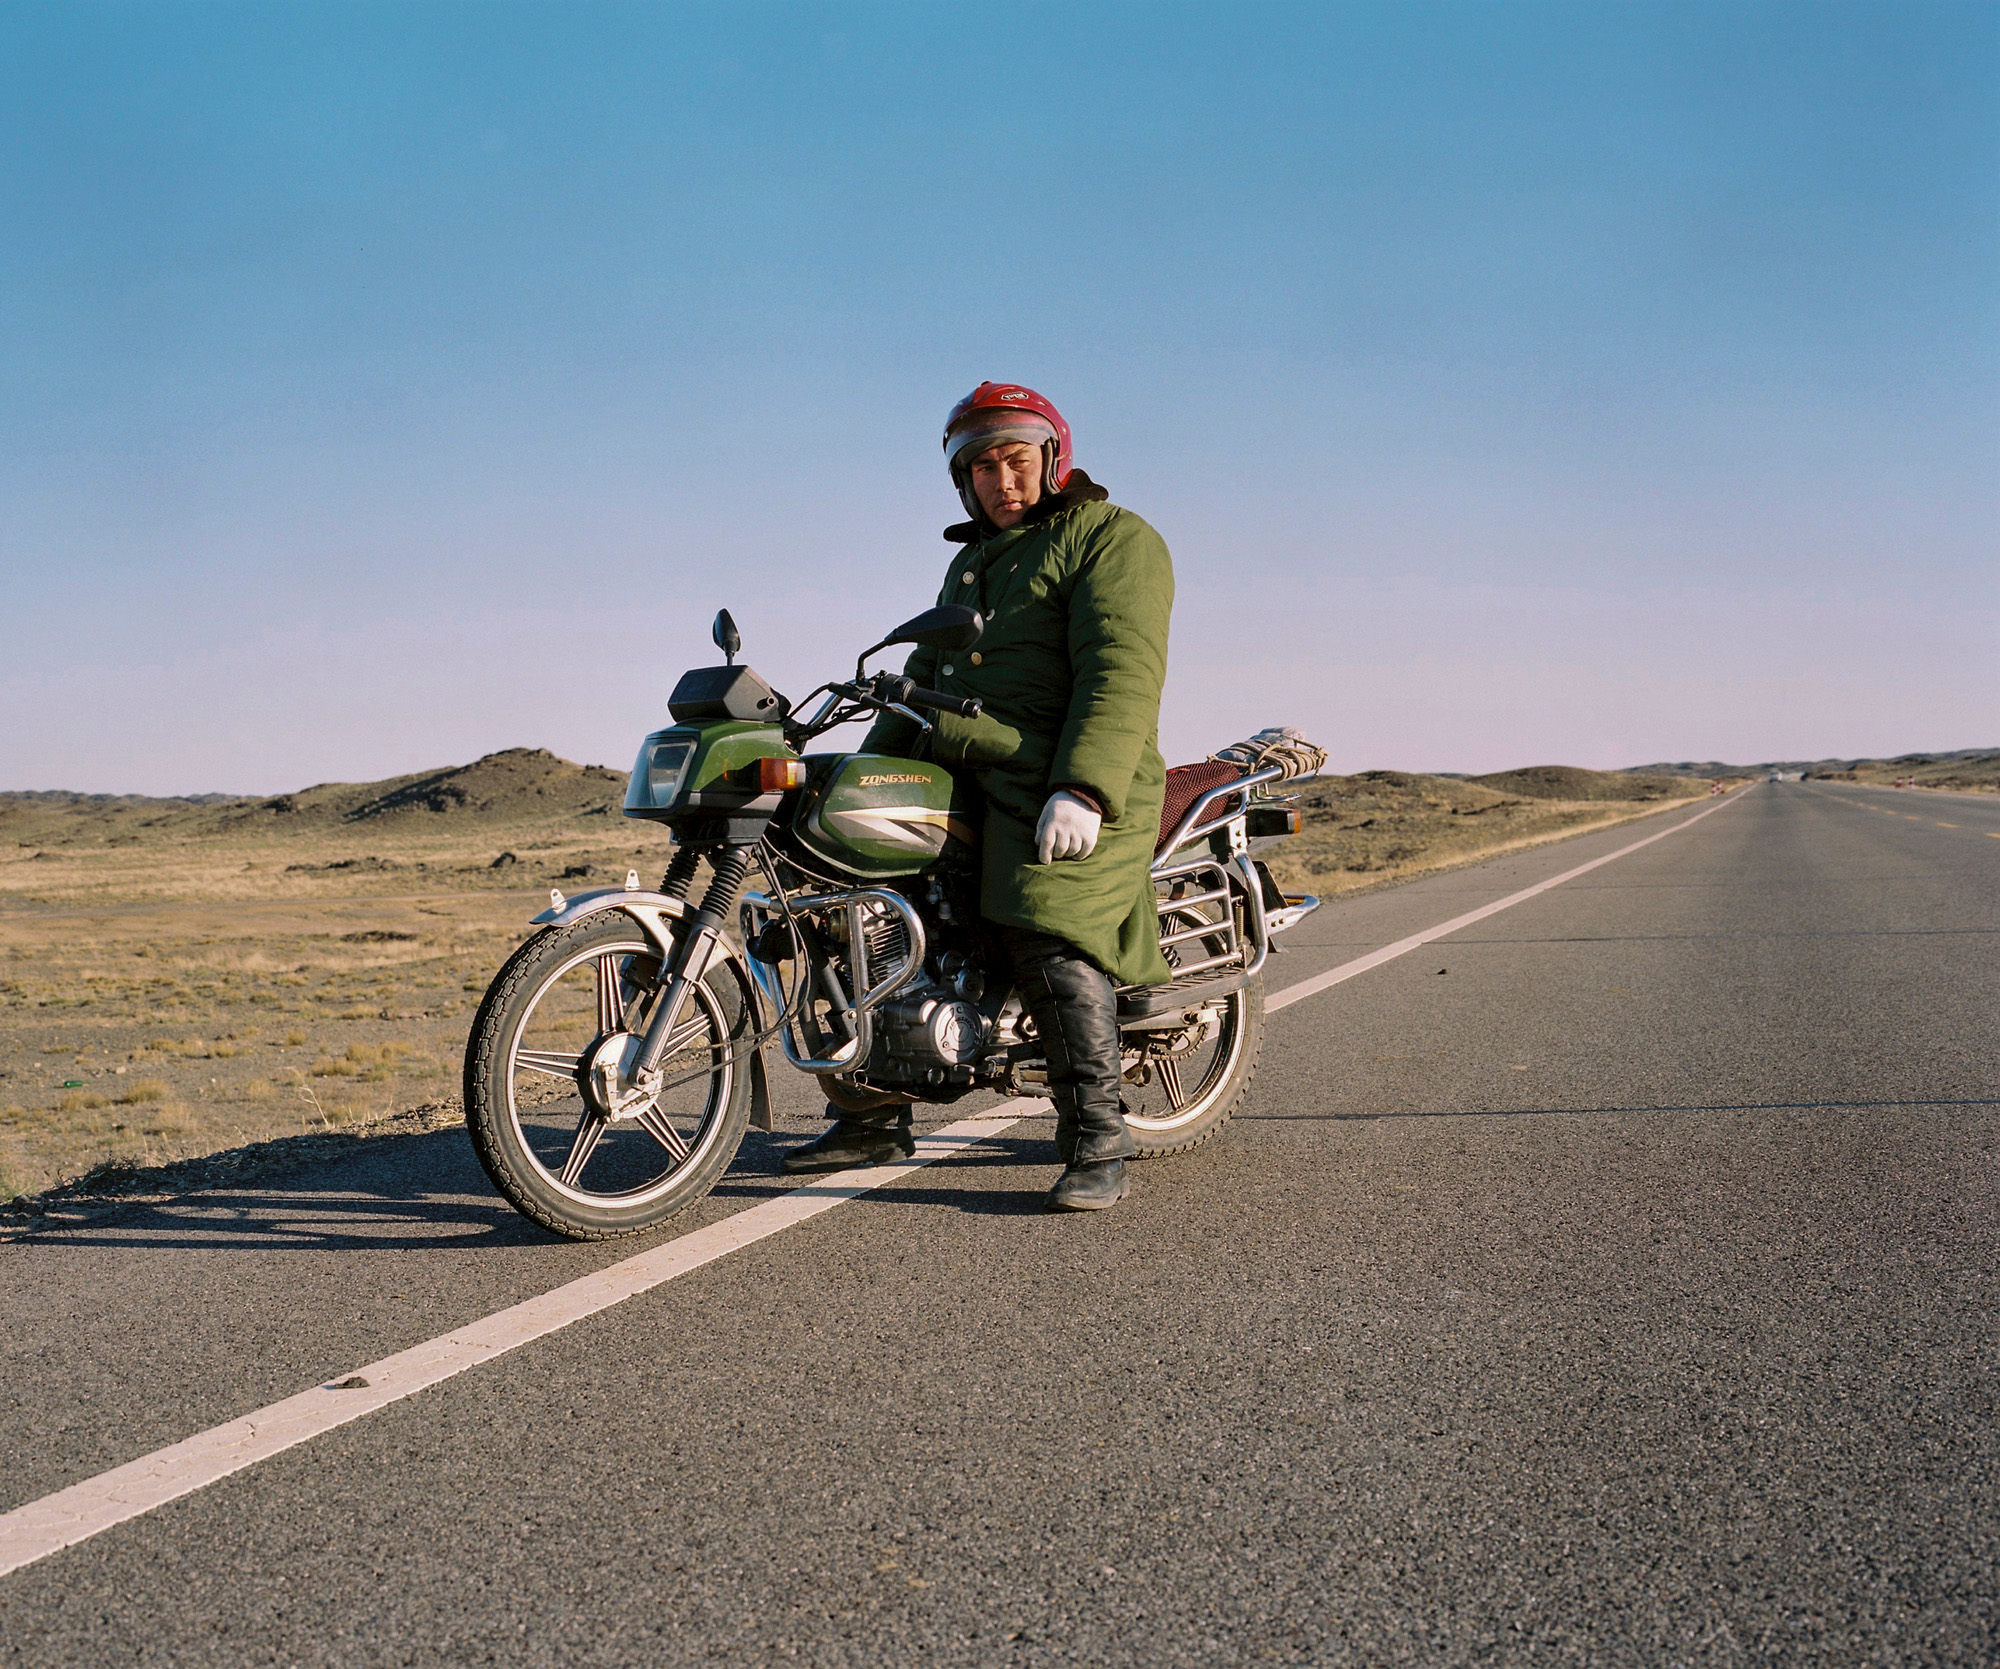 Kazakh minority Chinese rider on a road in Northern Xinjiang province at the border with Khazakhstan.